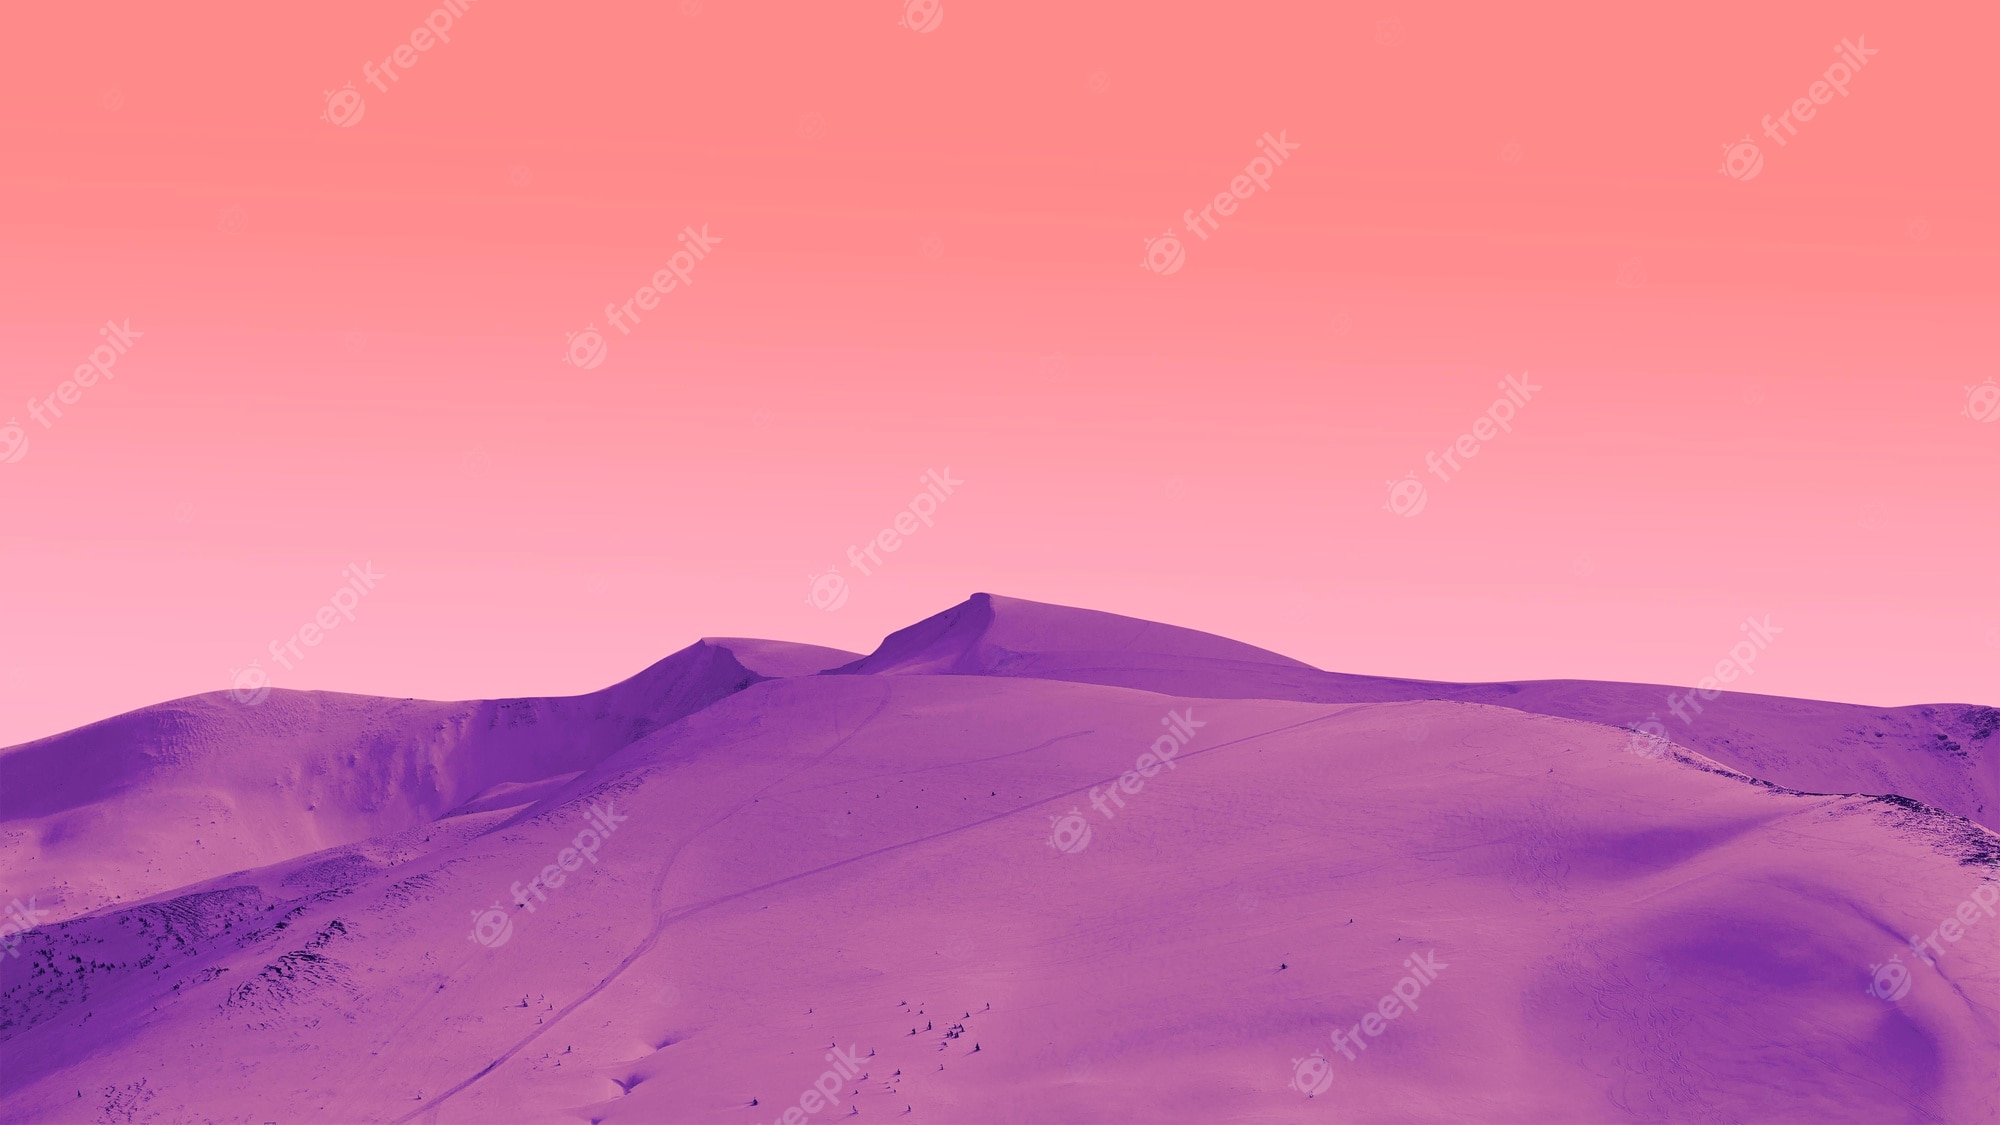 A purple mountain with pink sky - Purple, hot pink, landscape